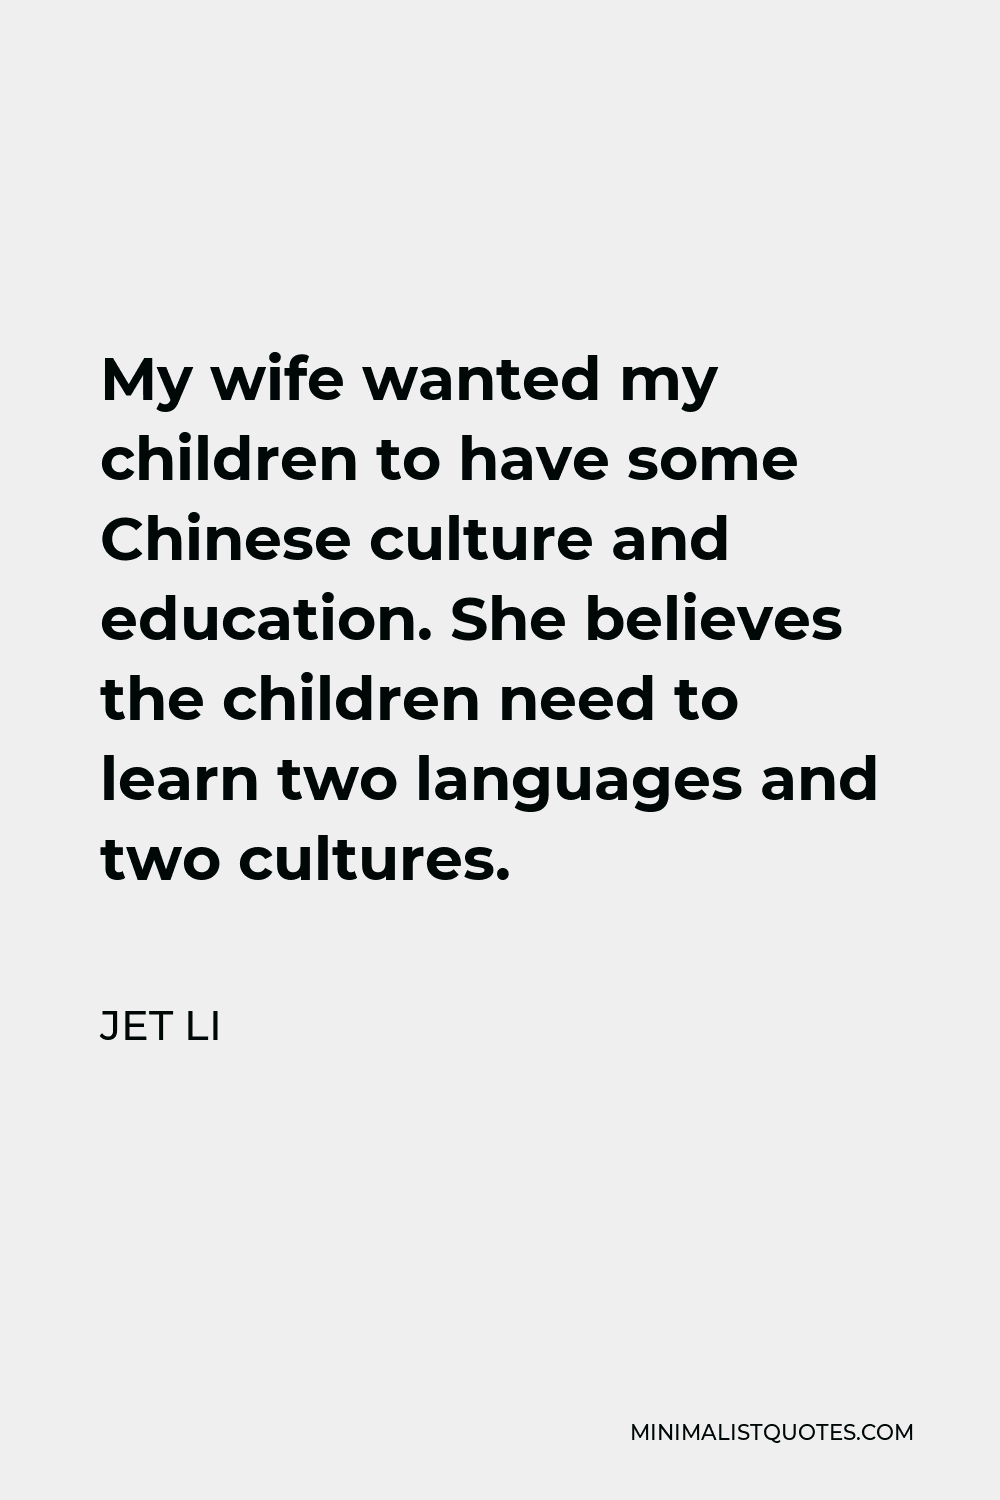 Jet Li Quote - My wife wanted my children to have some Chinese culture and education. She believes the children need to learn two languages and two cultures.